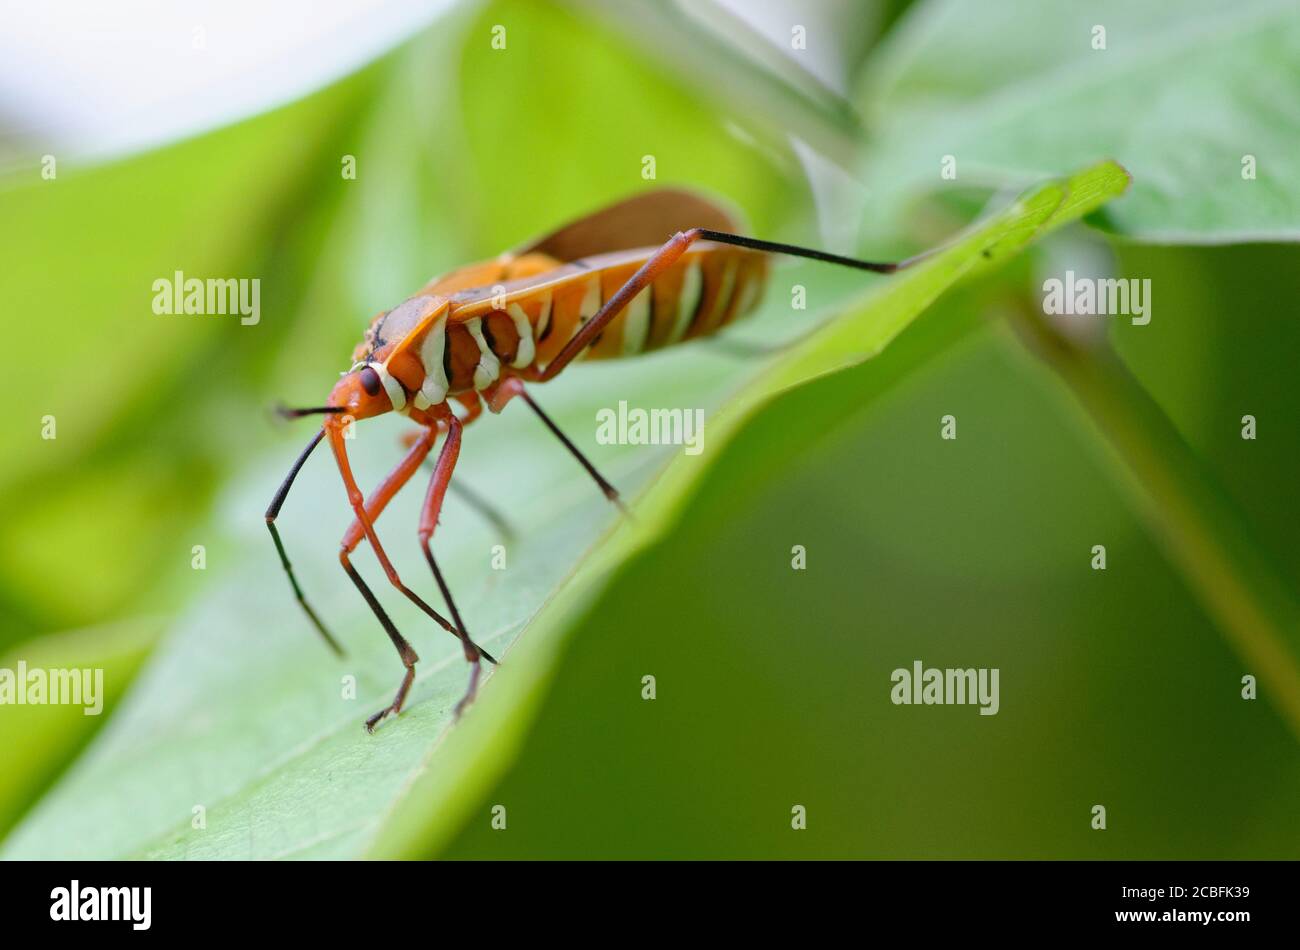 Orange insect with white stripes Stock Photo